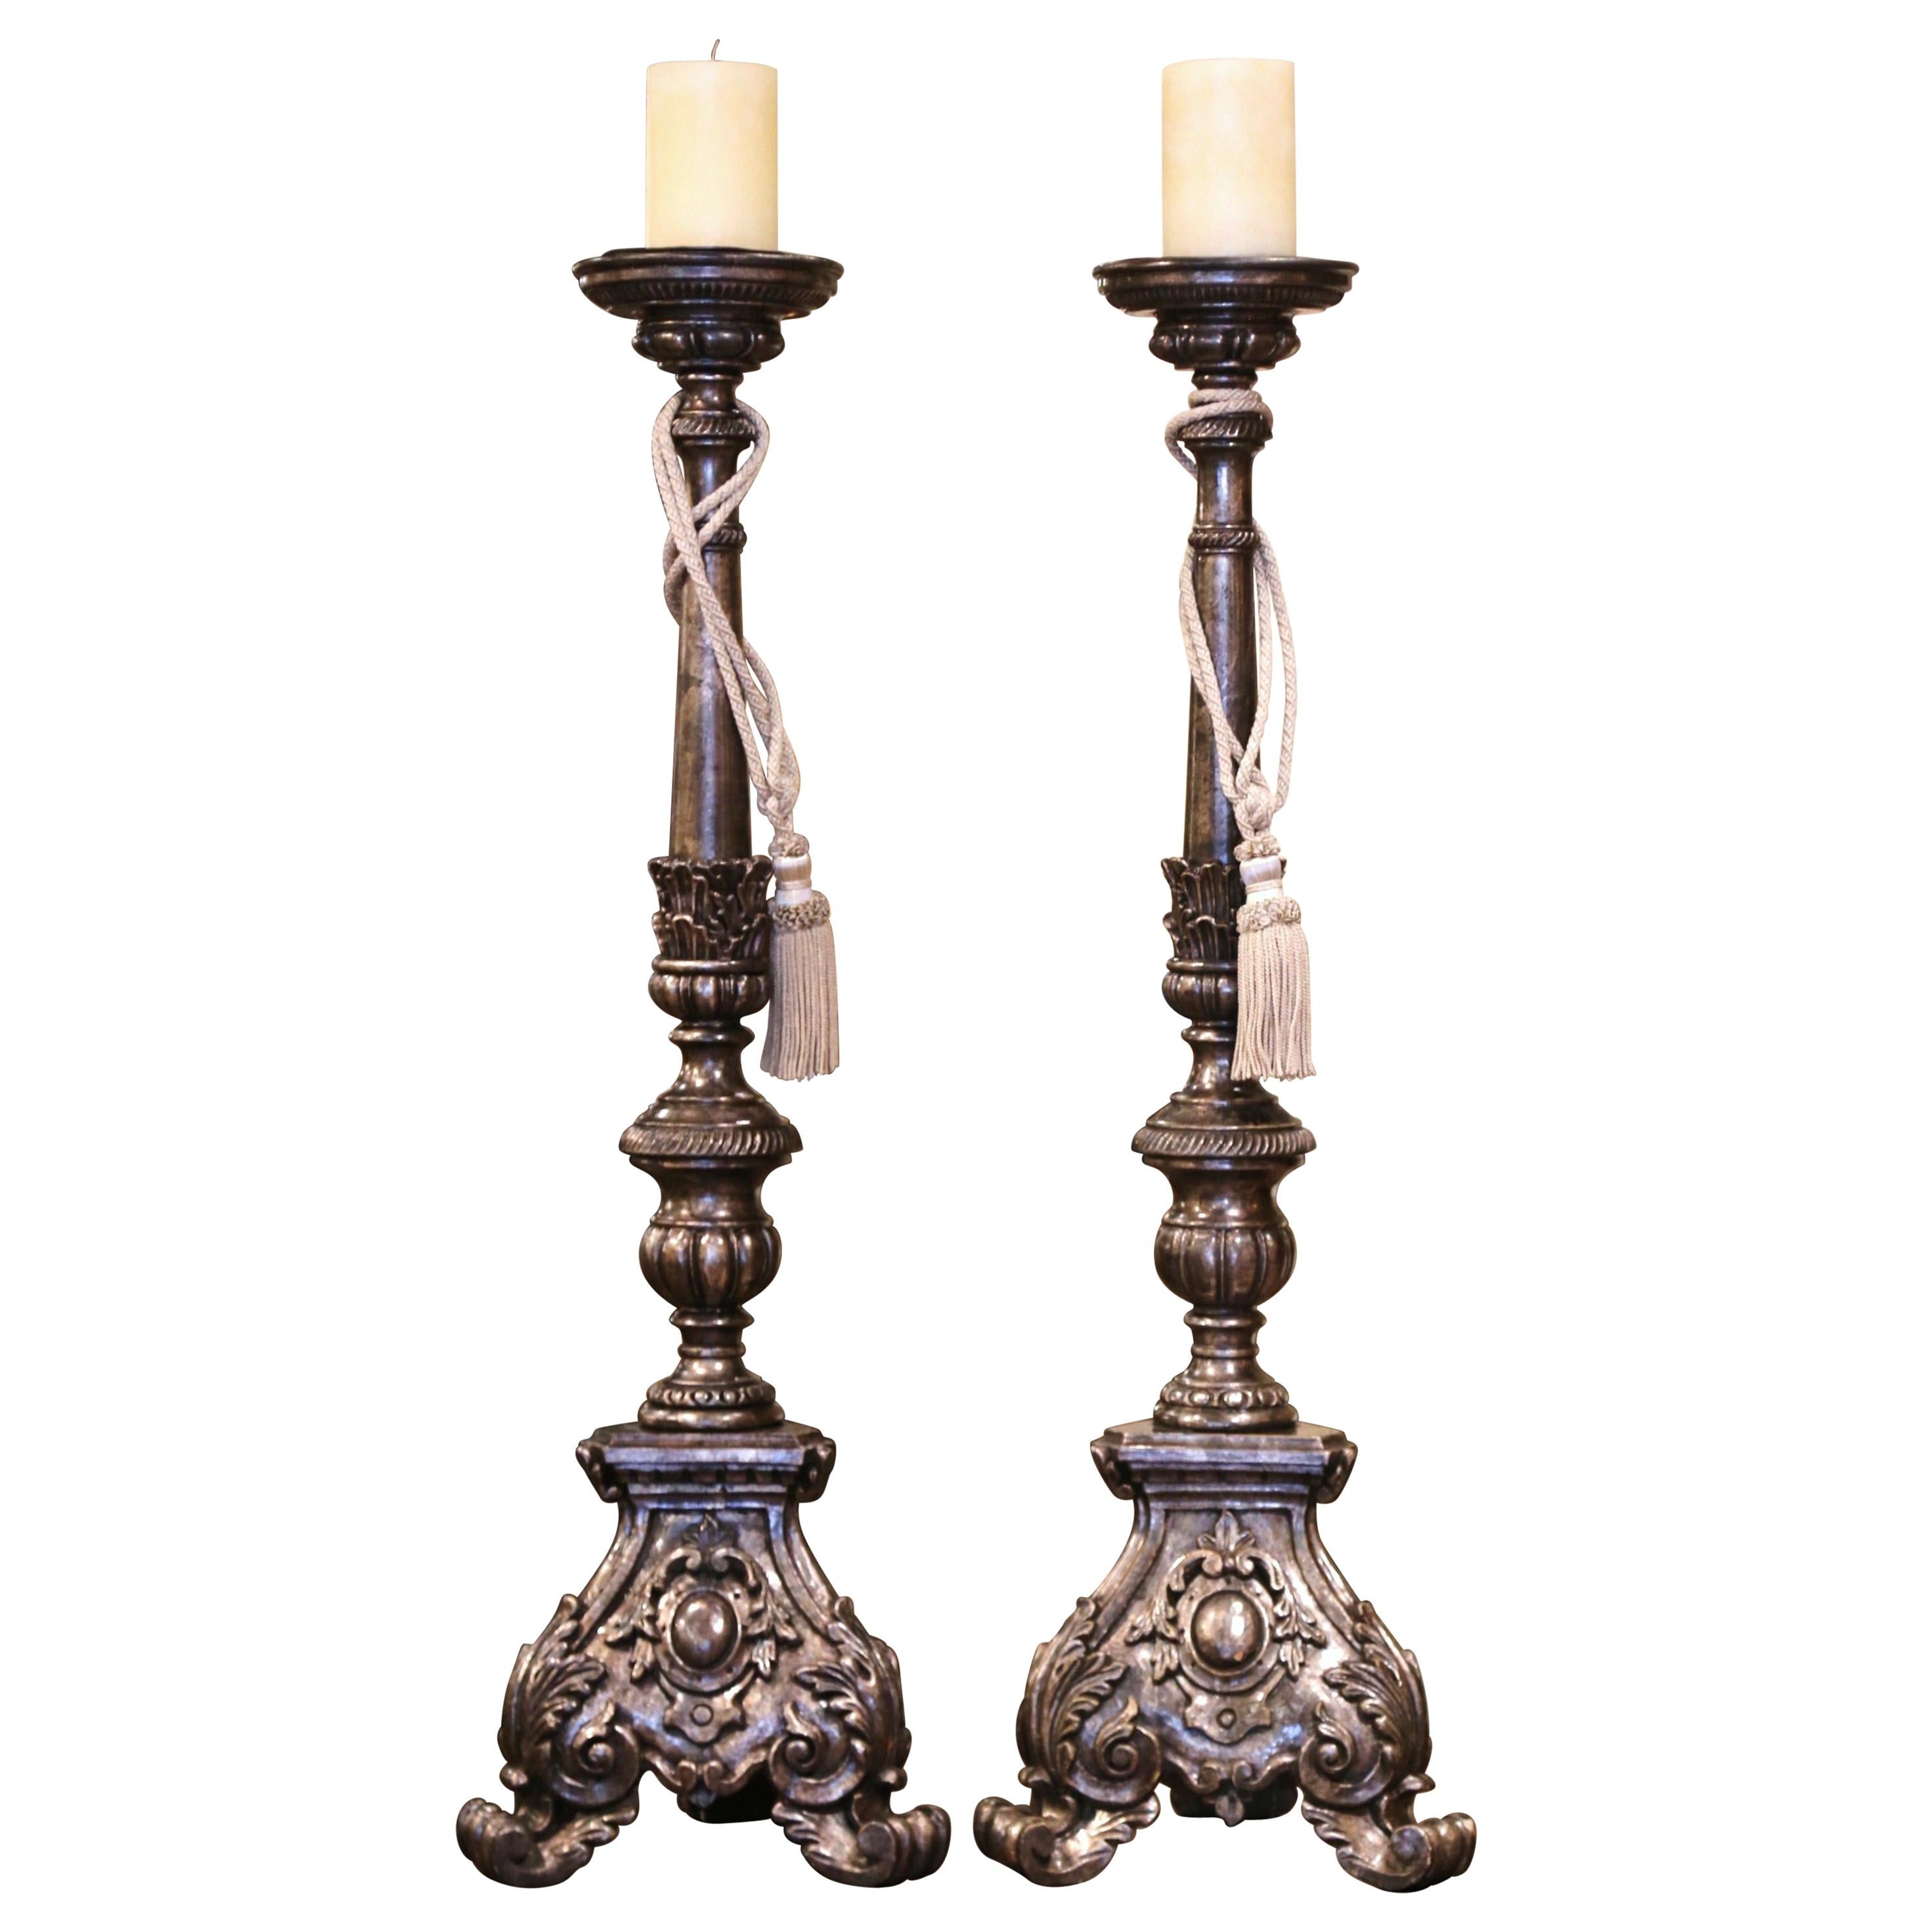 Pair of Mid-Century Italian Carved Silver Leaf Candlesticks Prickets